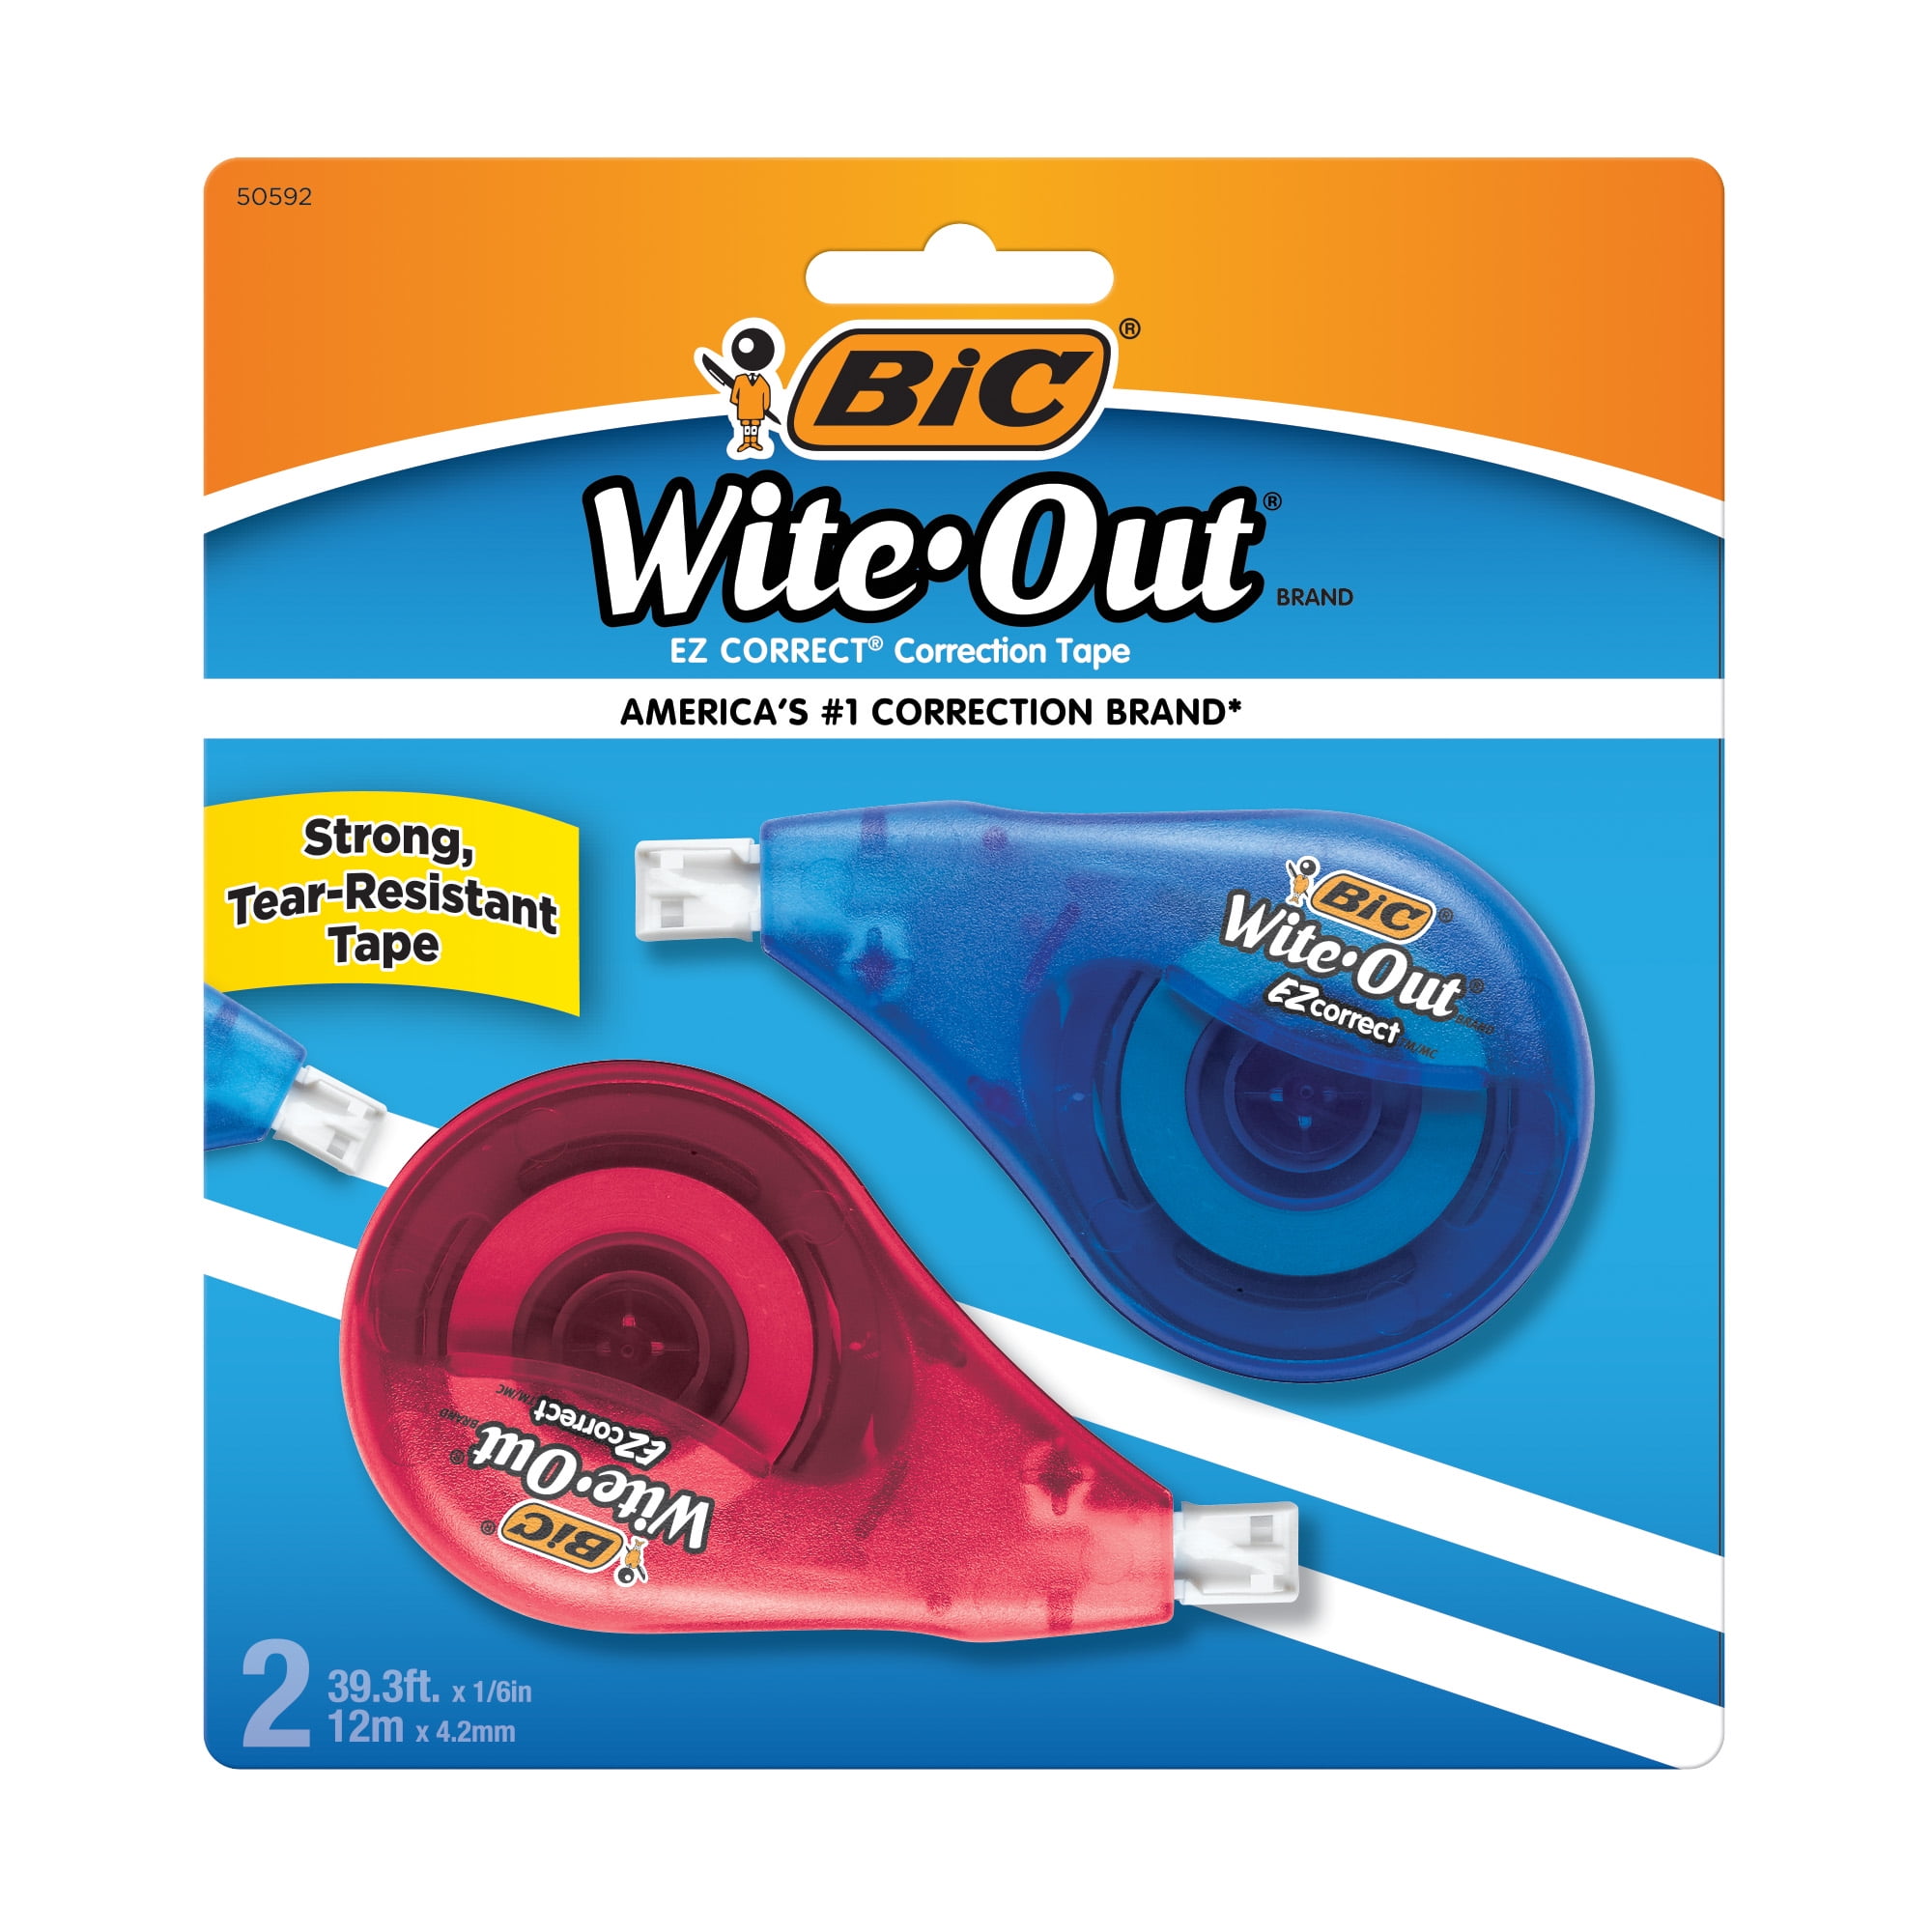 Bic Wite Out Brand Ez Correct Correction Tape White 2 Pack For School